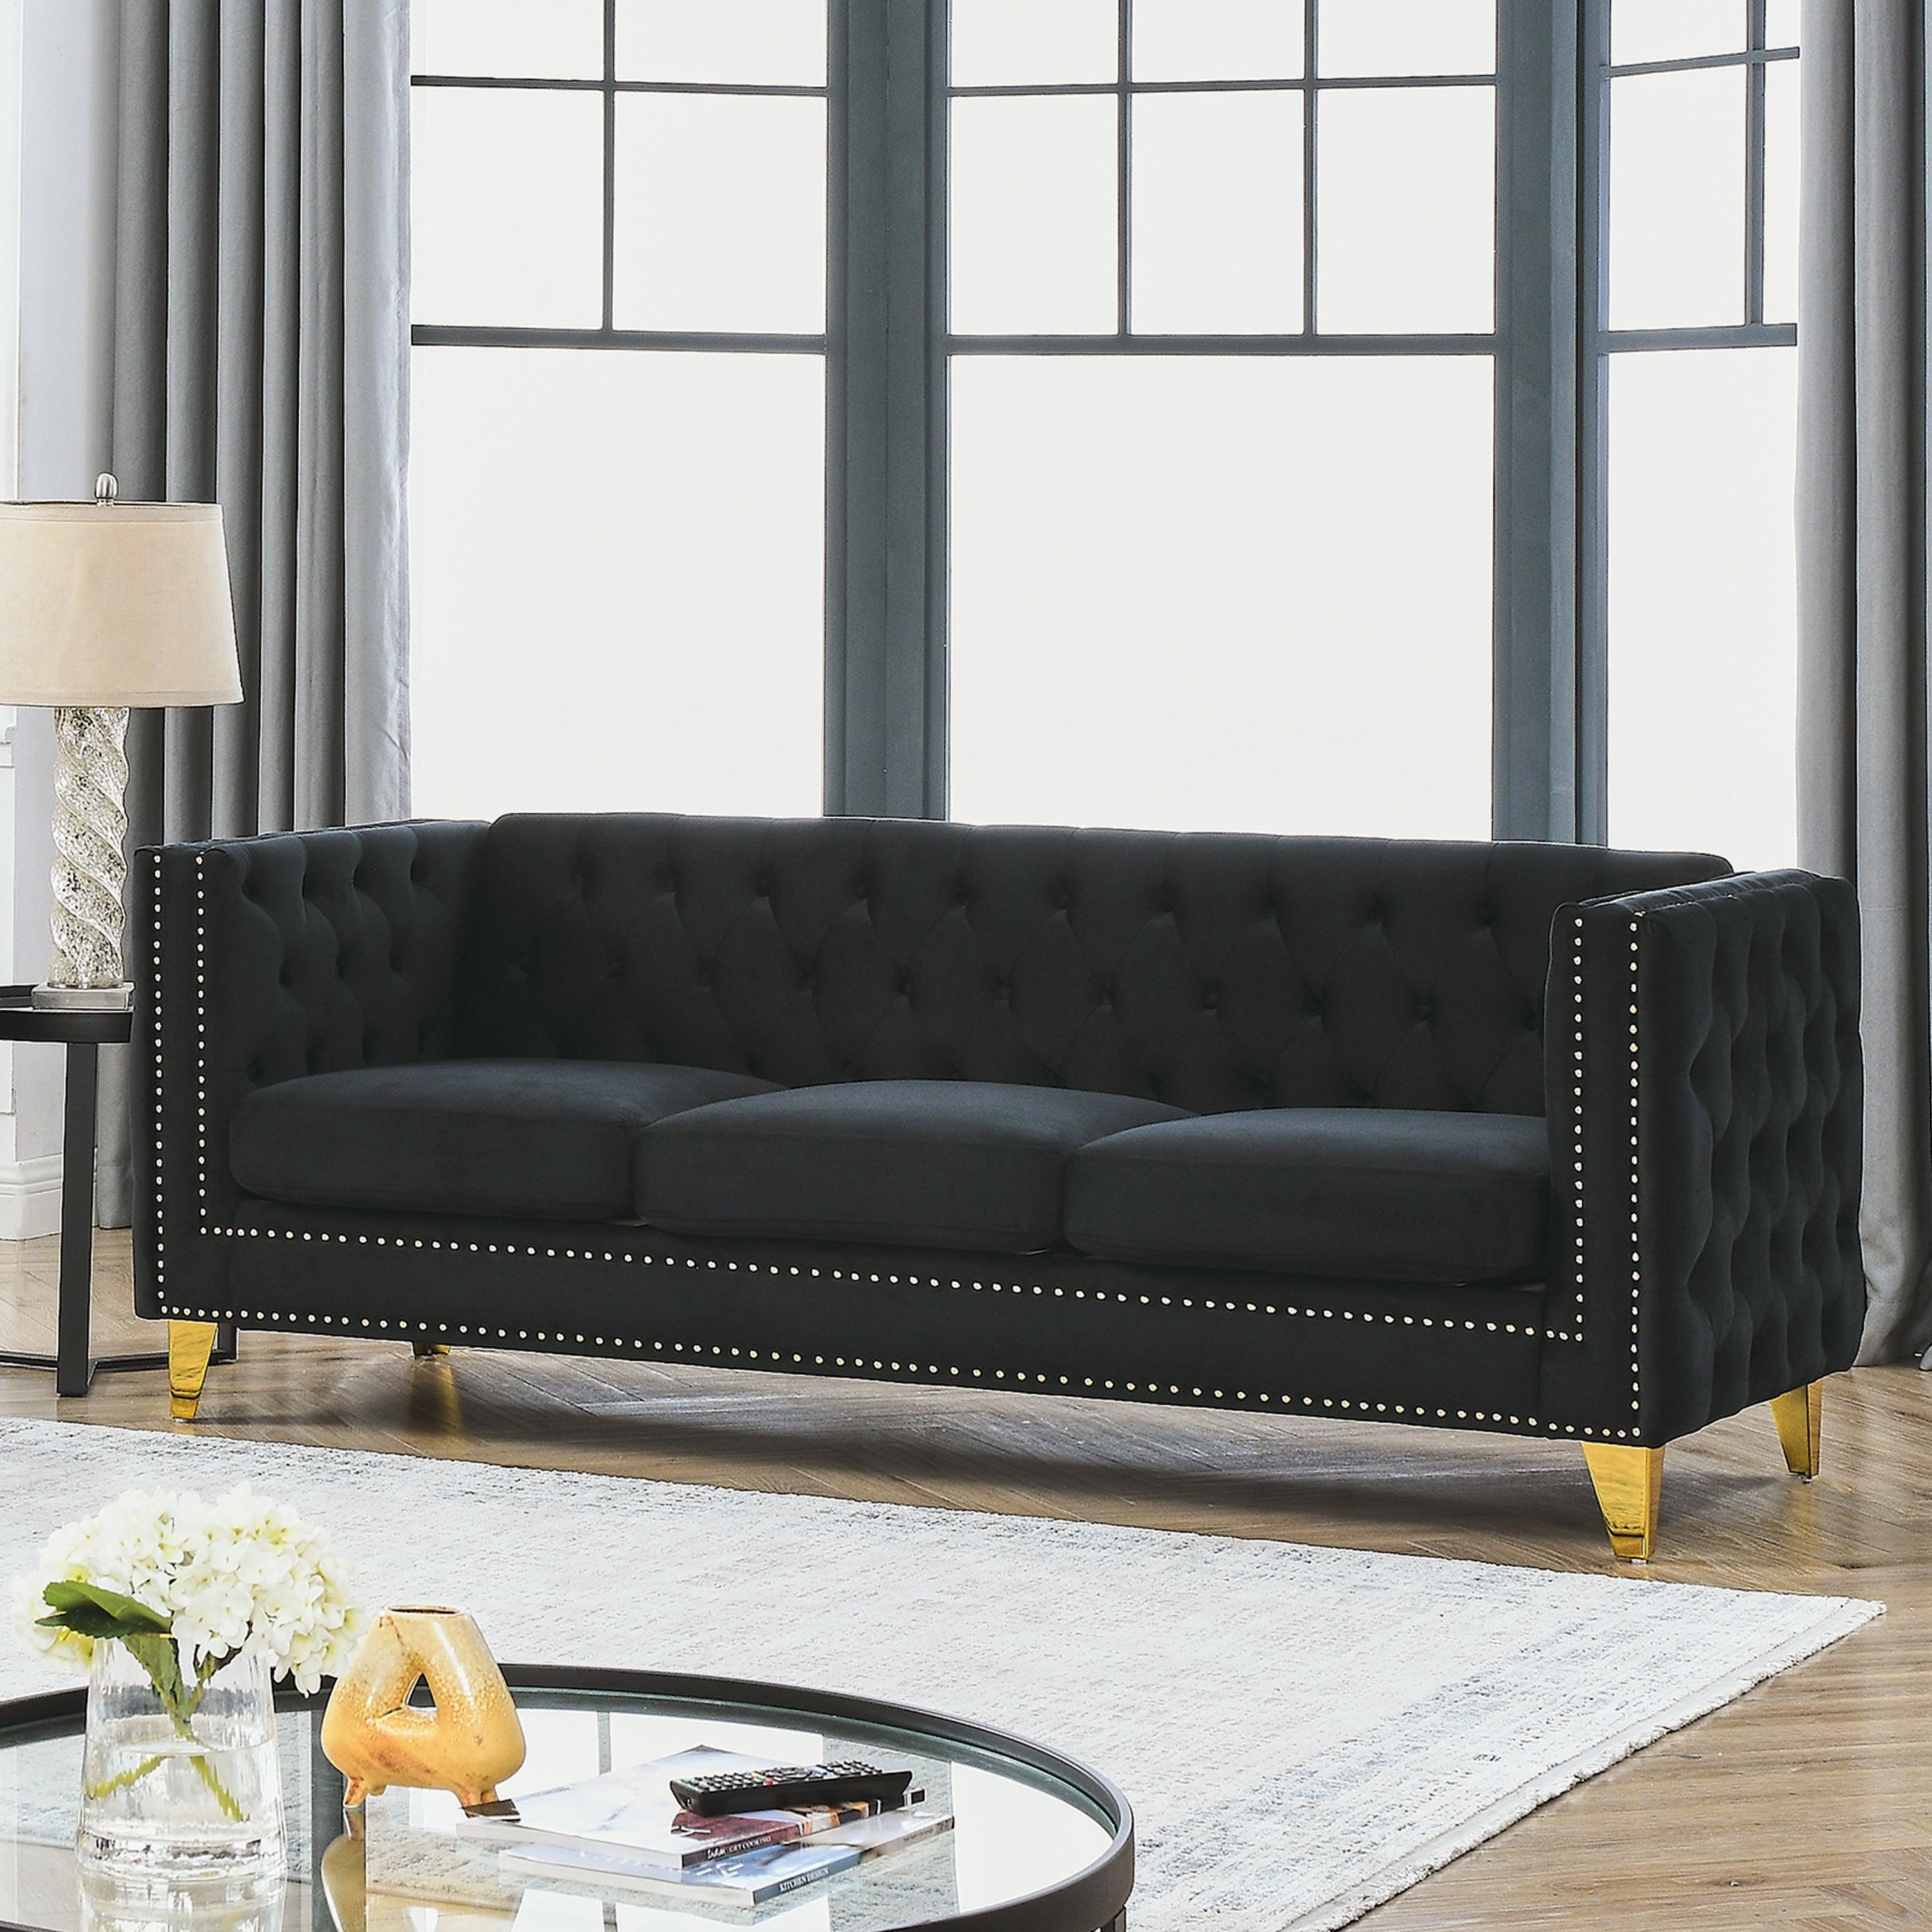 🆓🚛 80.5" 3 Seater Velvet Sofa for Living Room, Buttons Tufted Square Arm Couch, Modern Couch Upholstered Button & Metal Legs, Sofa Couch for Bedroom, Black